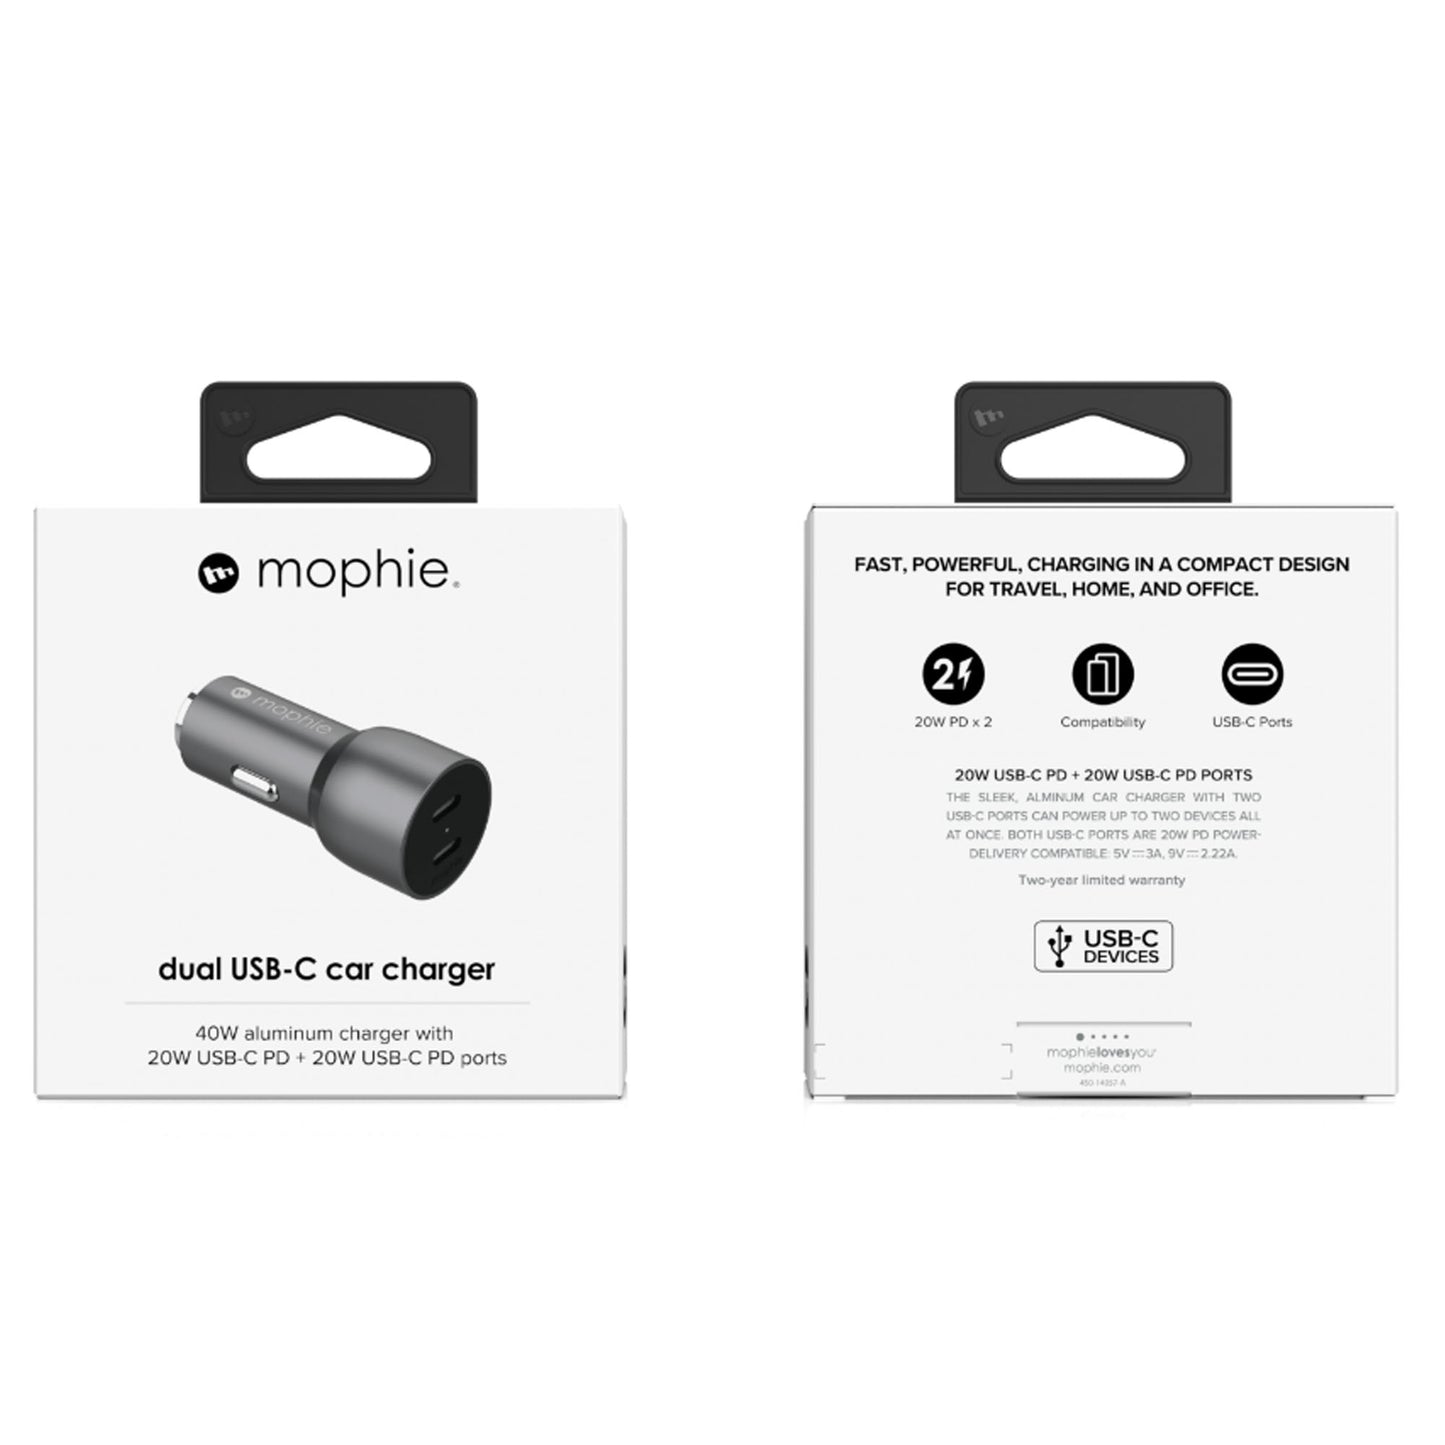 Mophie 40W Dual USB-C Car Charger ( 20W USB-C + 20W USB-C PD ) - Space Gray (Barcode: 840056174573 )